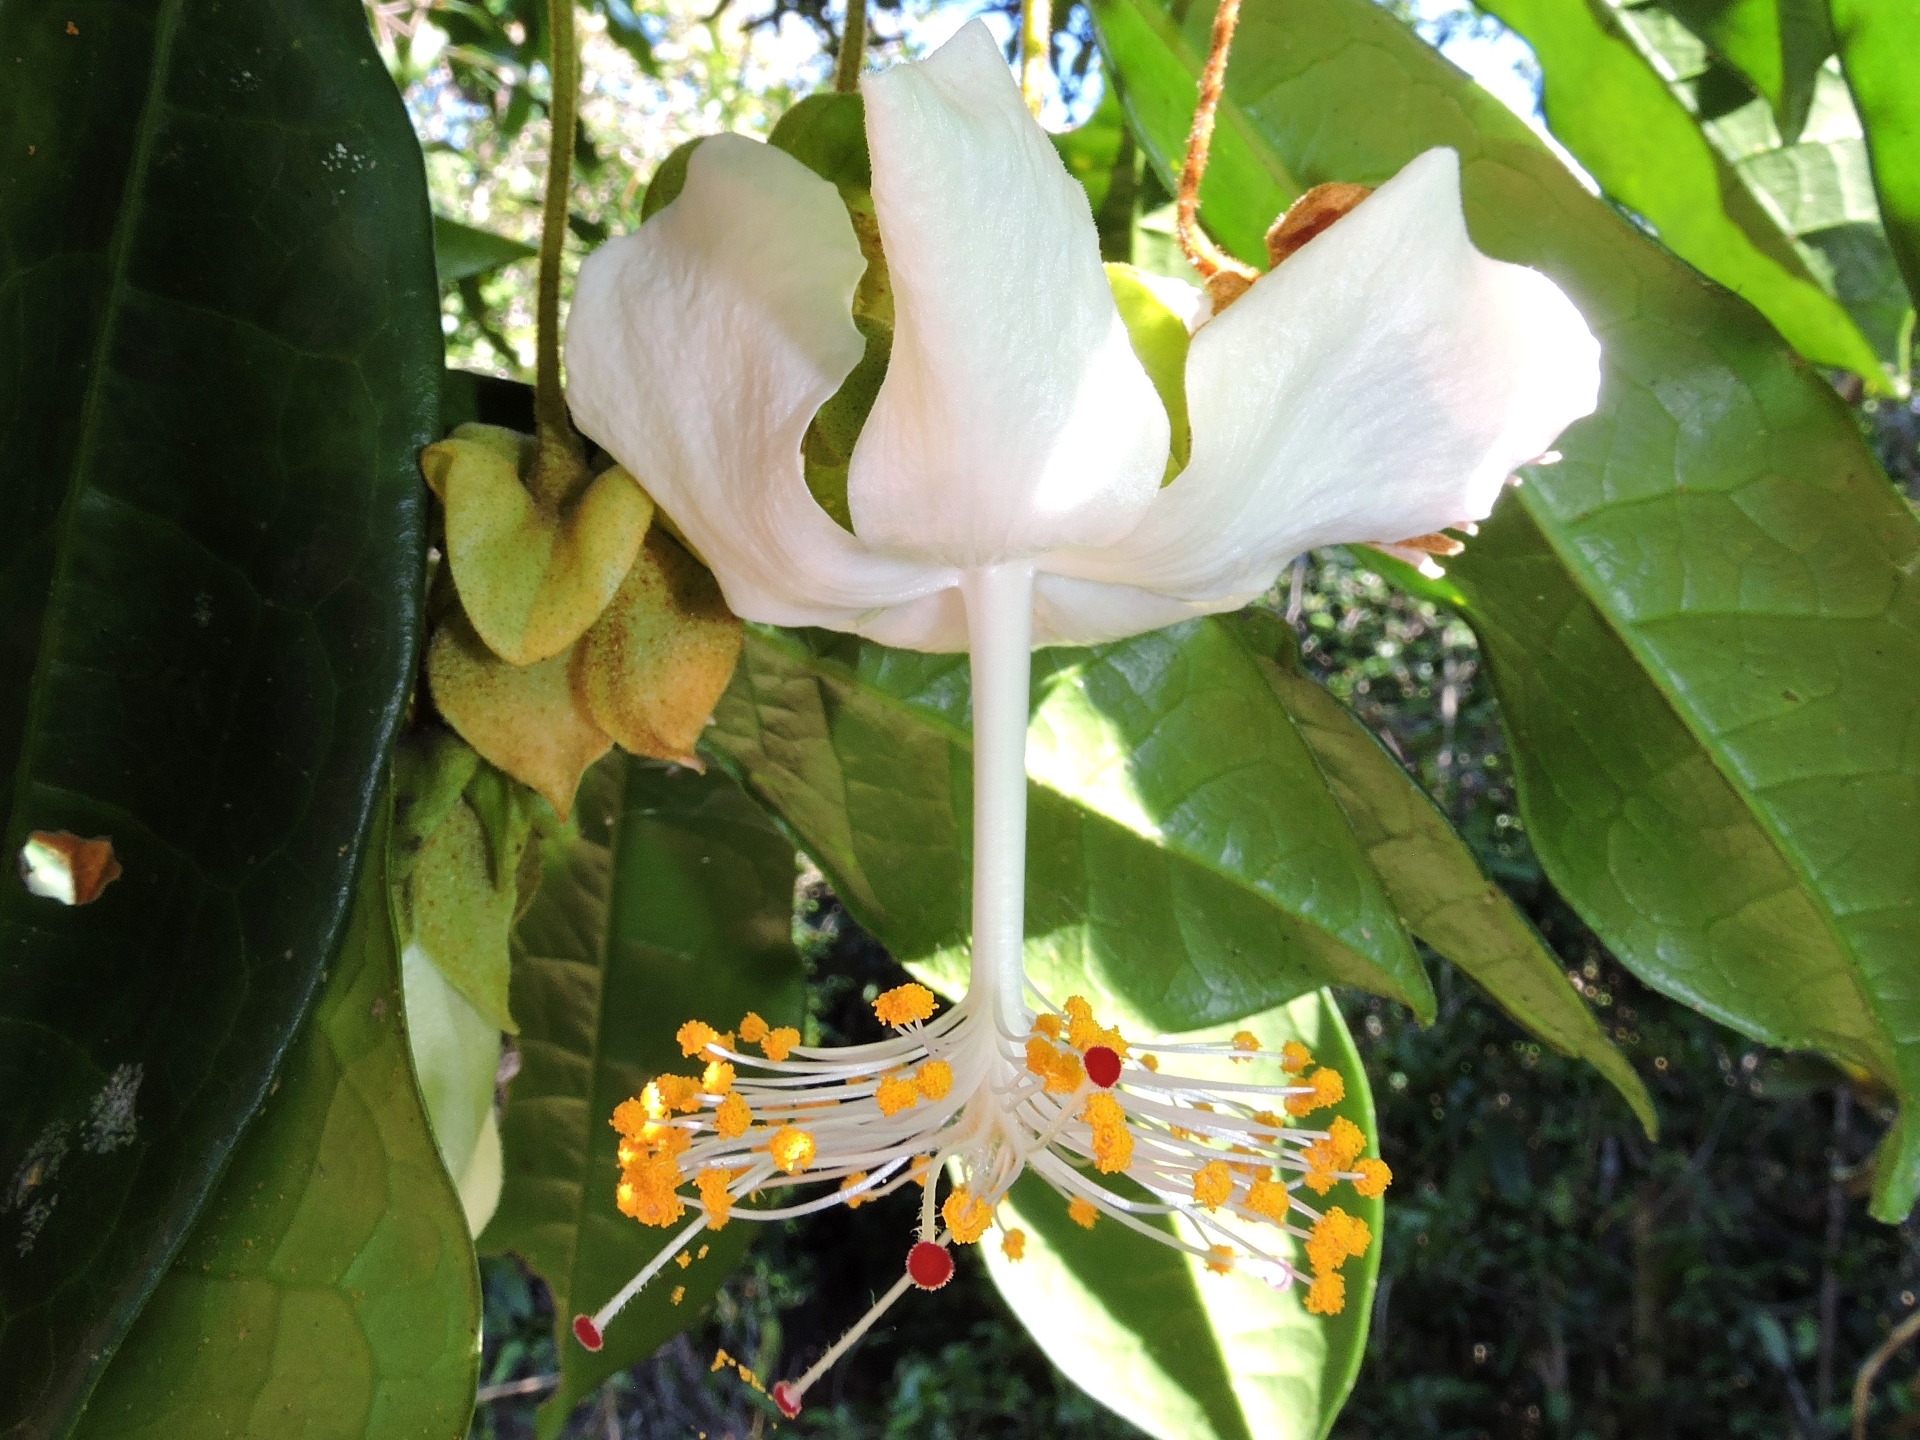 Image shows a close-up of a large flower with five large, bright white petals and at its base hangs an an umbrella of yellow stigmas full of pollen. There is the green foliage of a forest in the background.